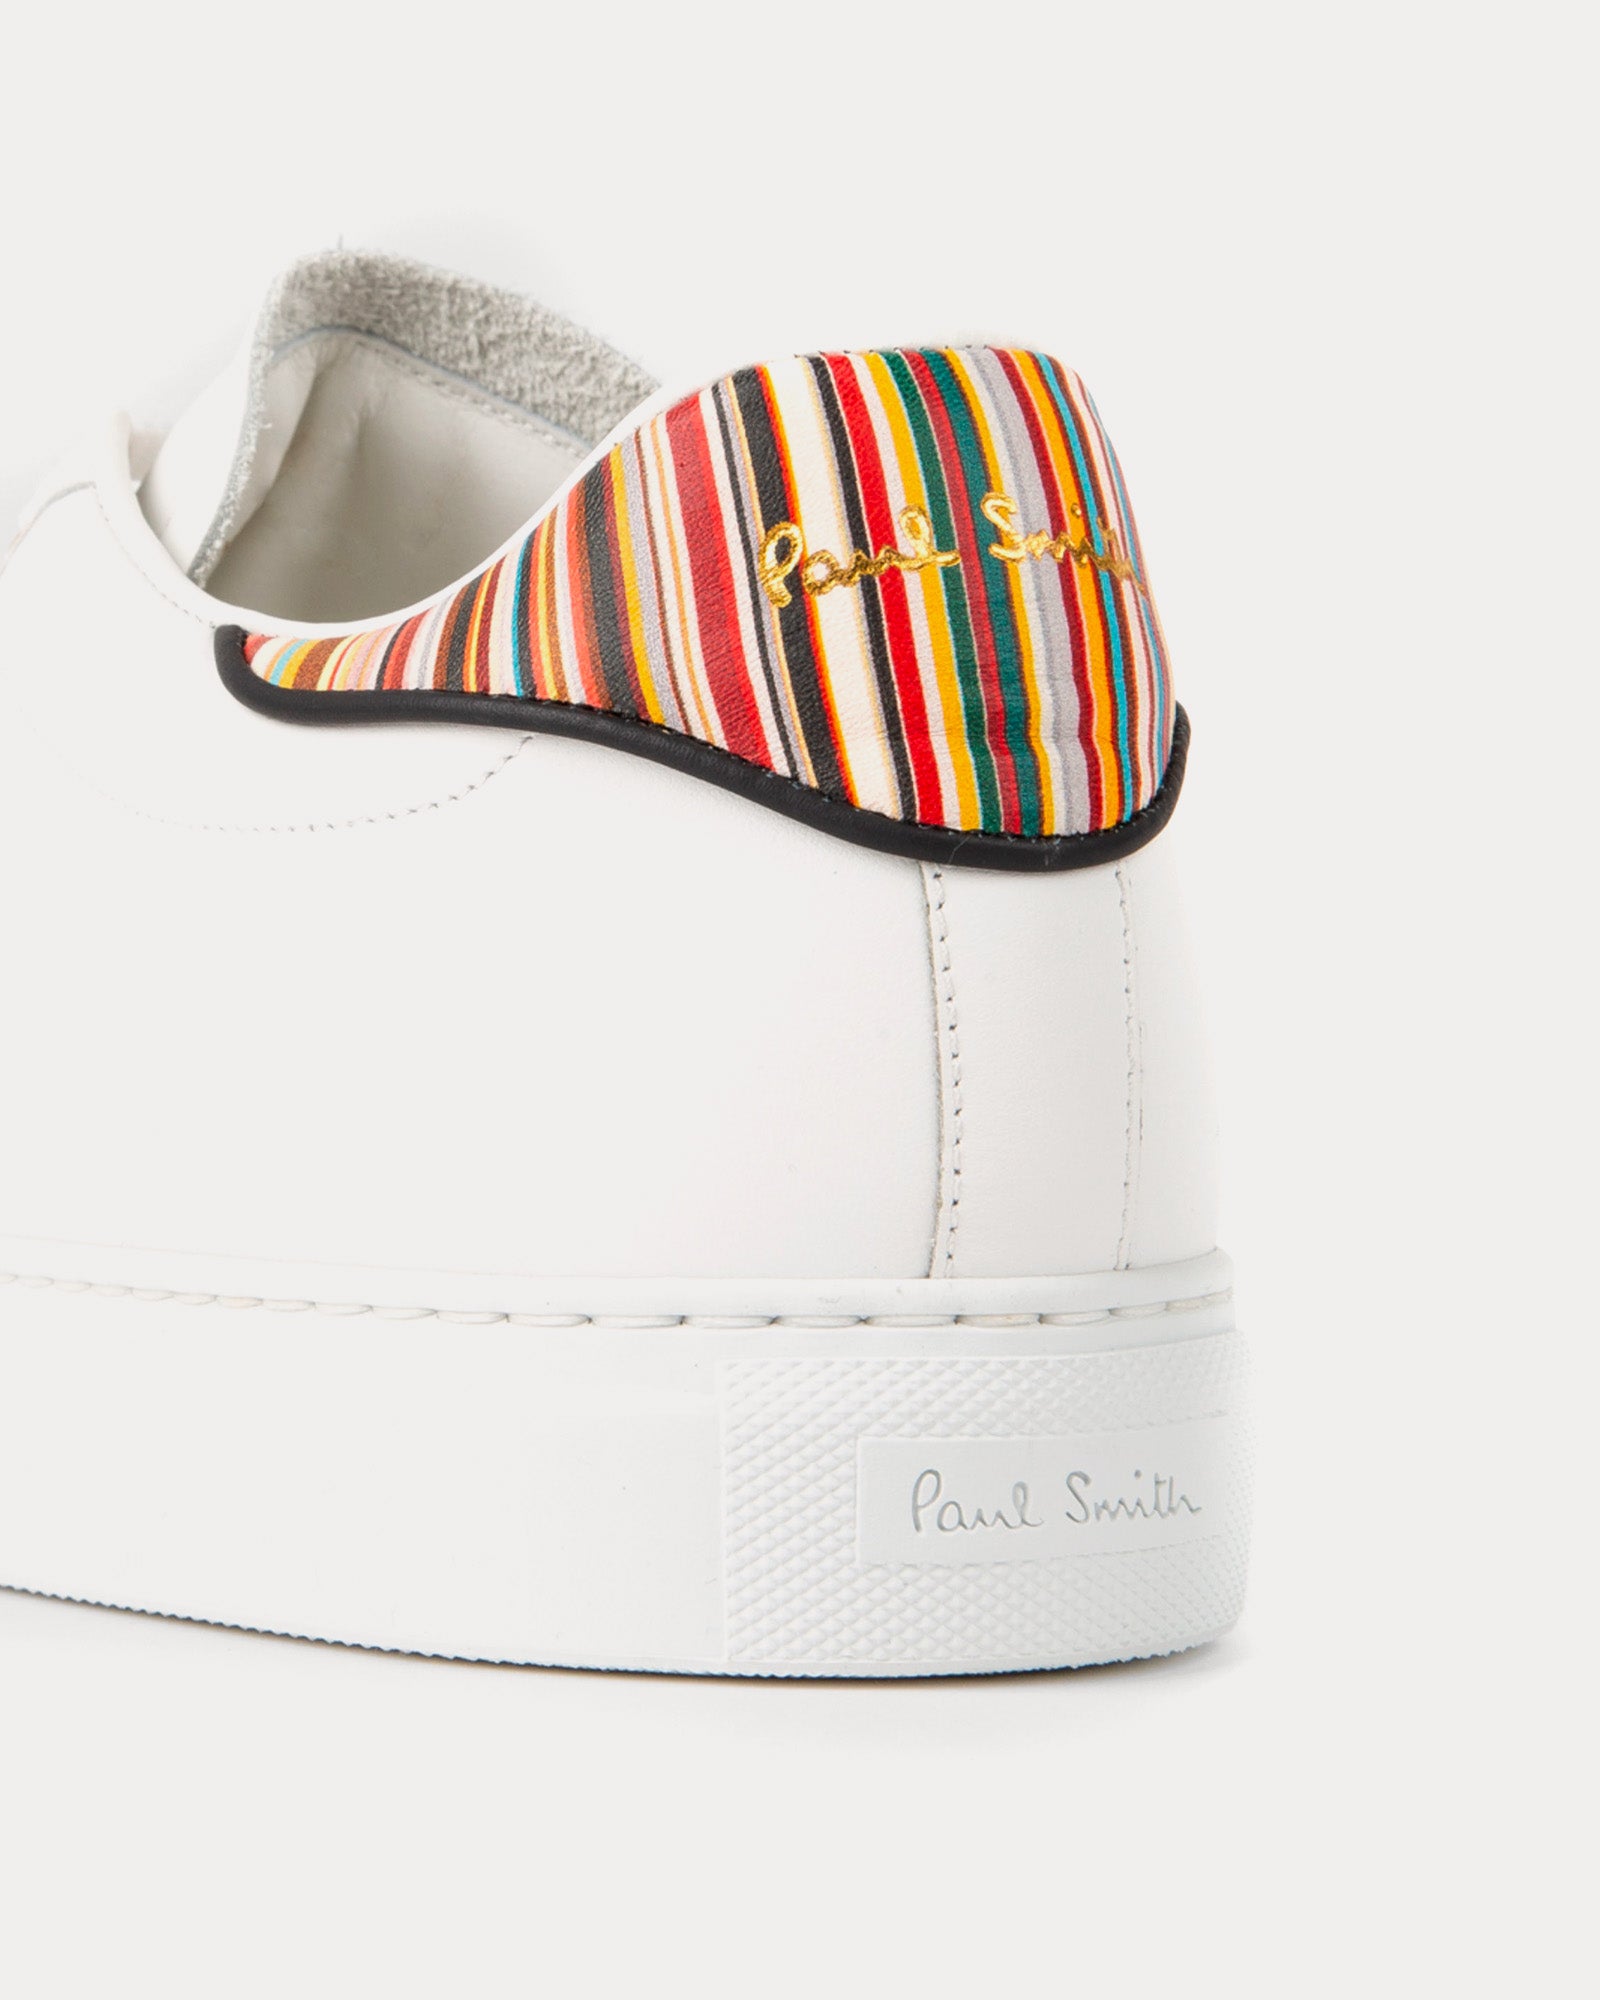 Paul Smith - Beck with Signature Stripe Leather White Low Top Sneakers